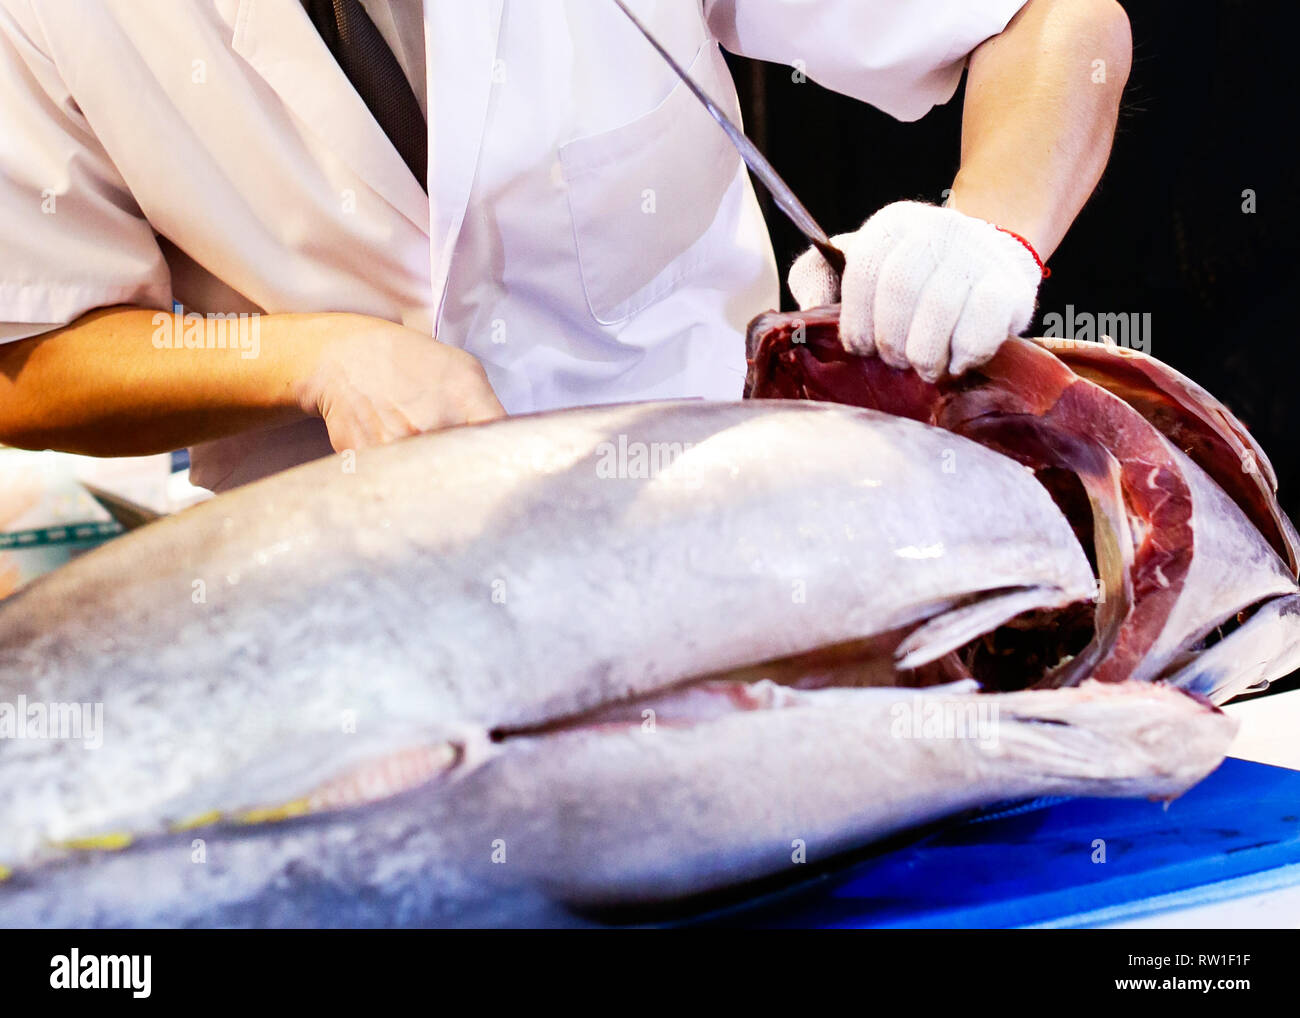 Image of Fisherman (Salesman) Is Cutting Fresh Tuna Fish In The Open Air  Fish Market Or Restaurant-YP686846-Picxy